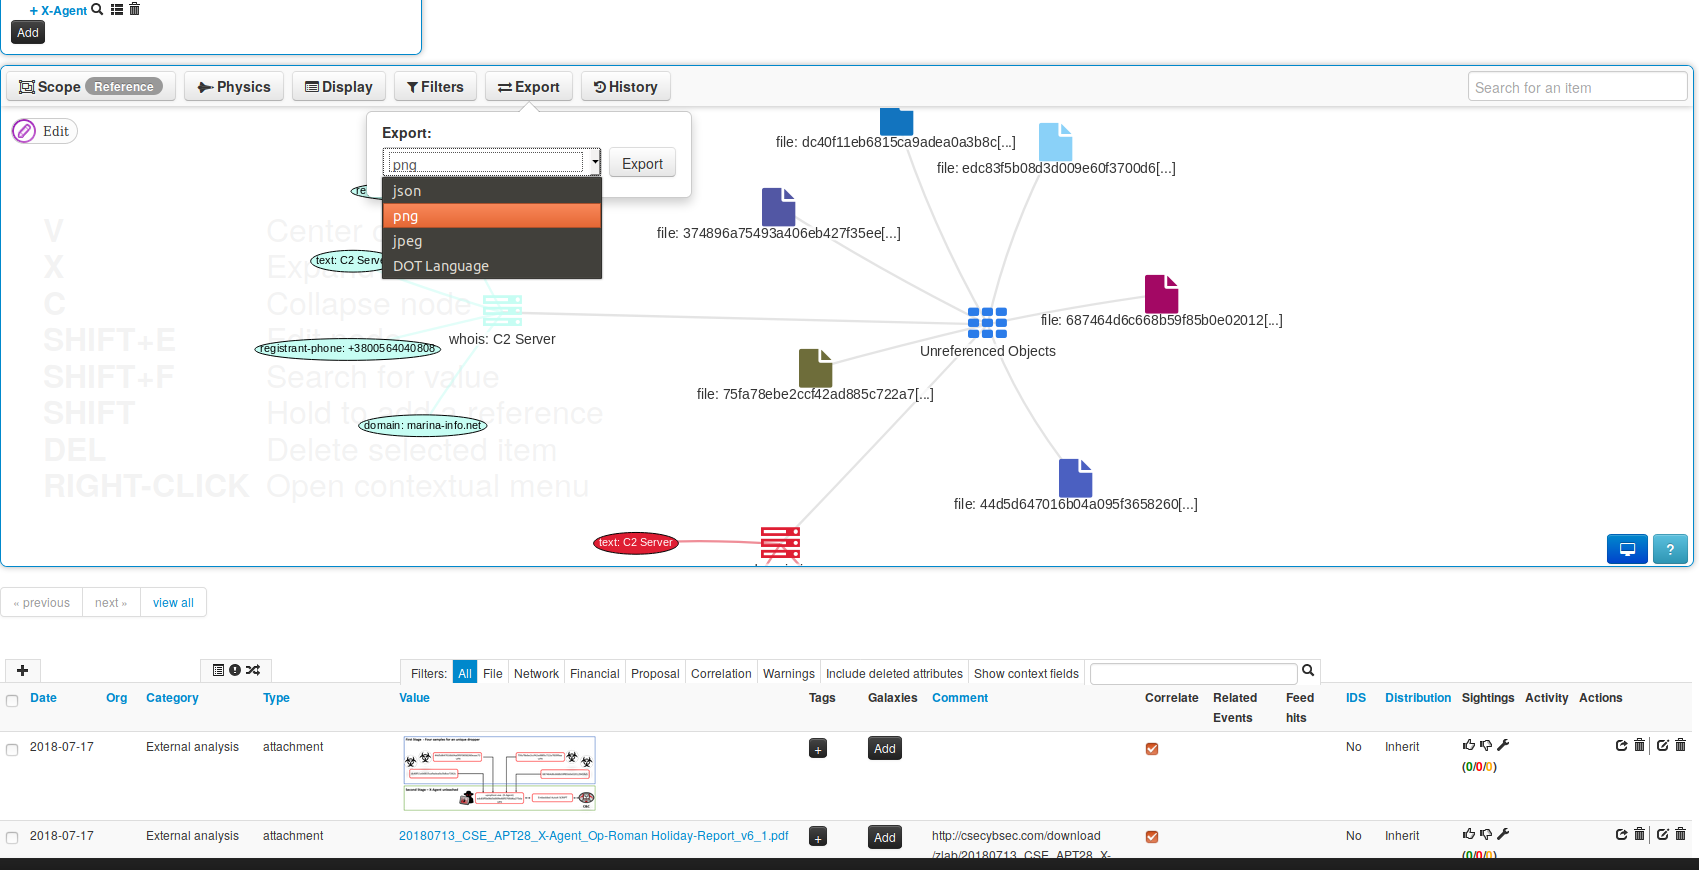 New functionality in the MISP event graph to export the graph and save the state of the graph